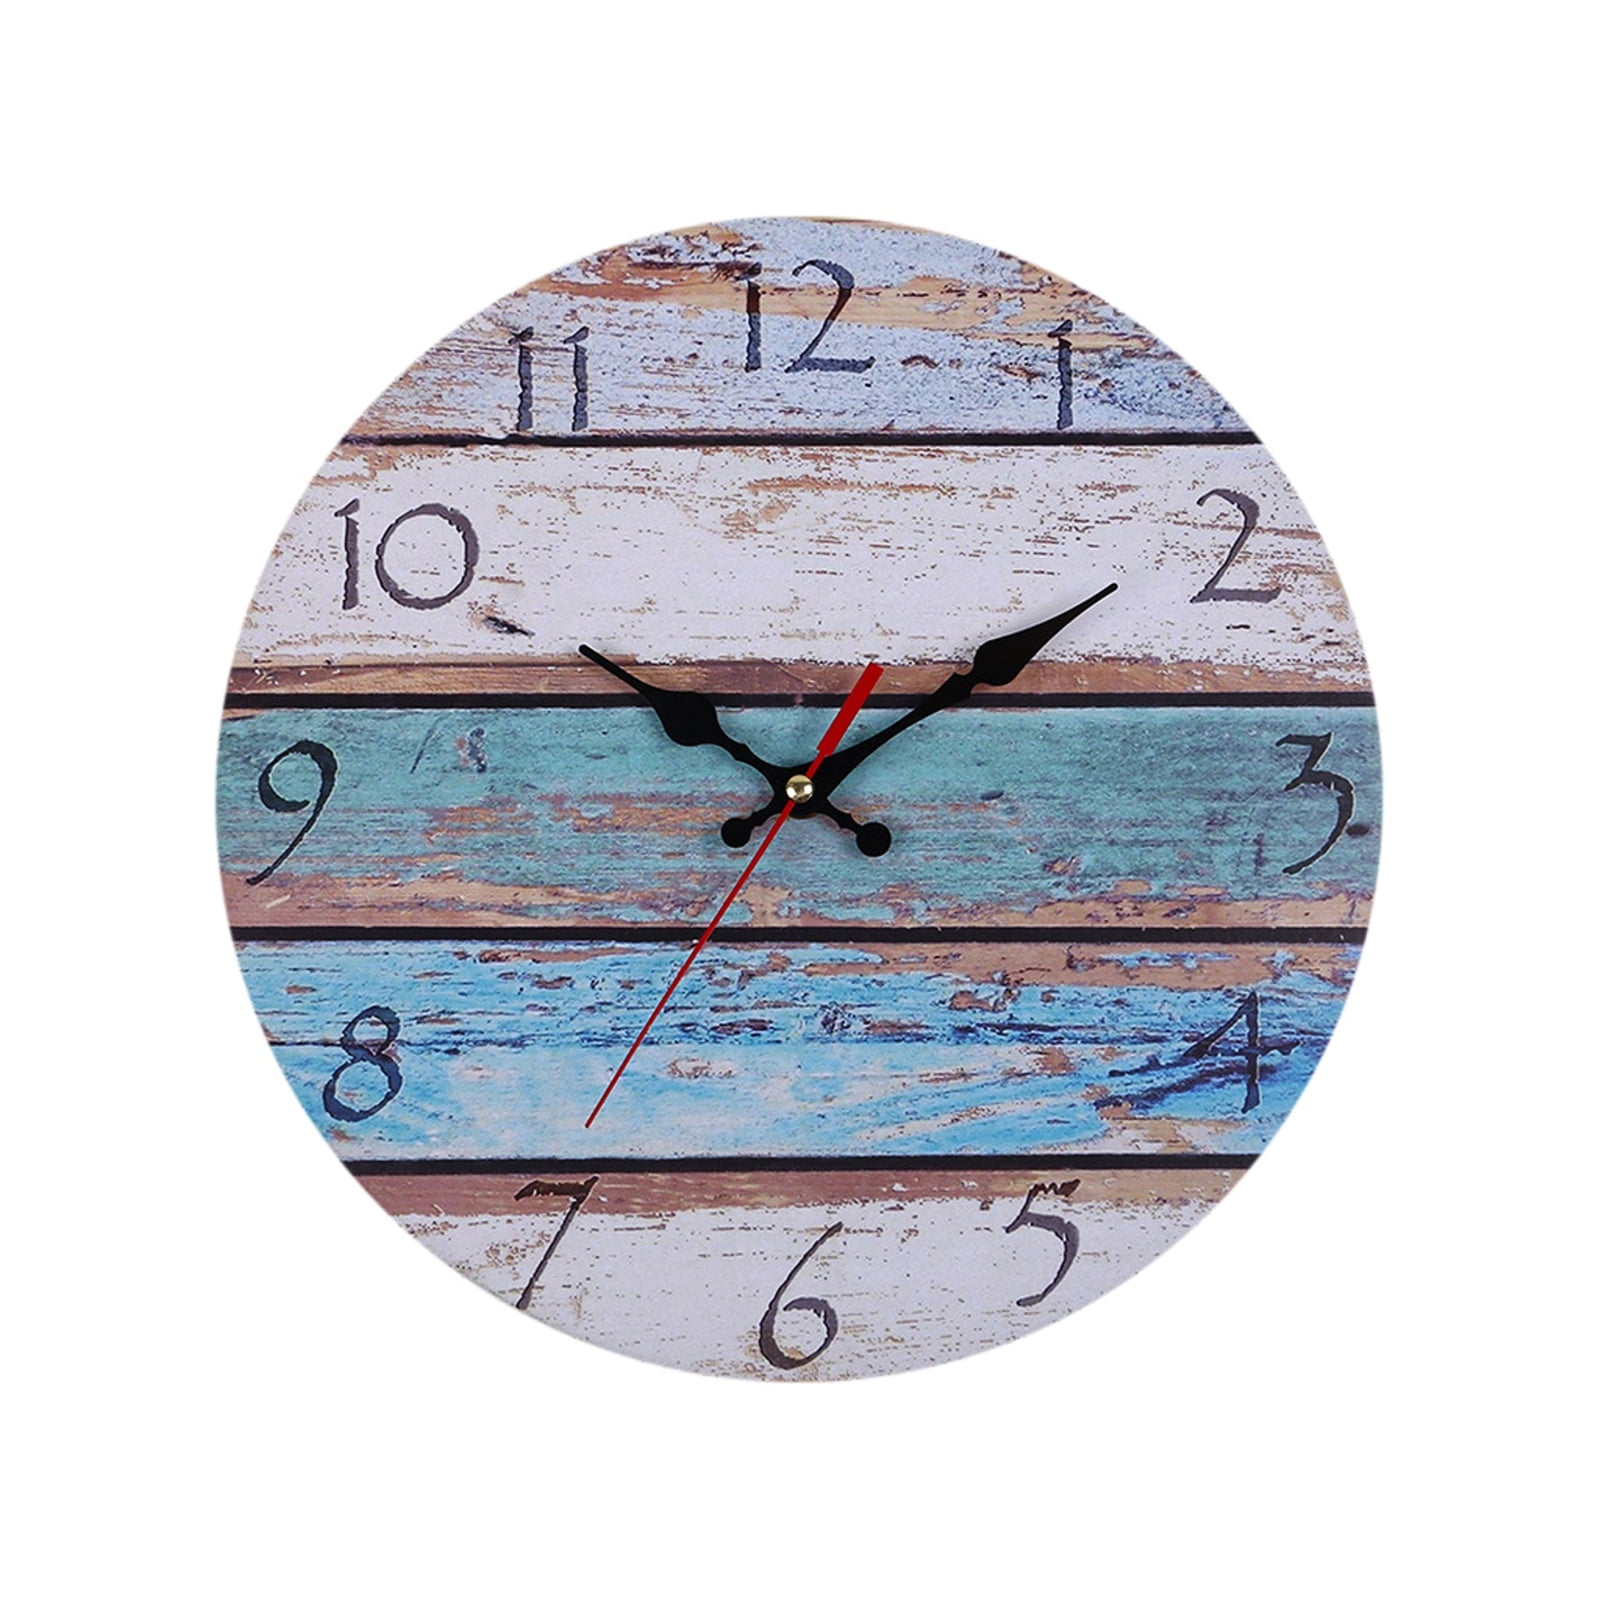 Operated Silent Non -Ticking Wall Clocks Circle Stripe Round Wall Clock Easy to Read Decorative for Living Room Kitchen Home Bathroom Bedroom Office